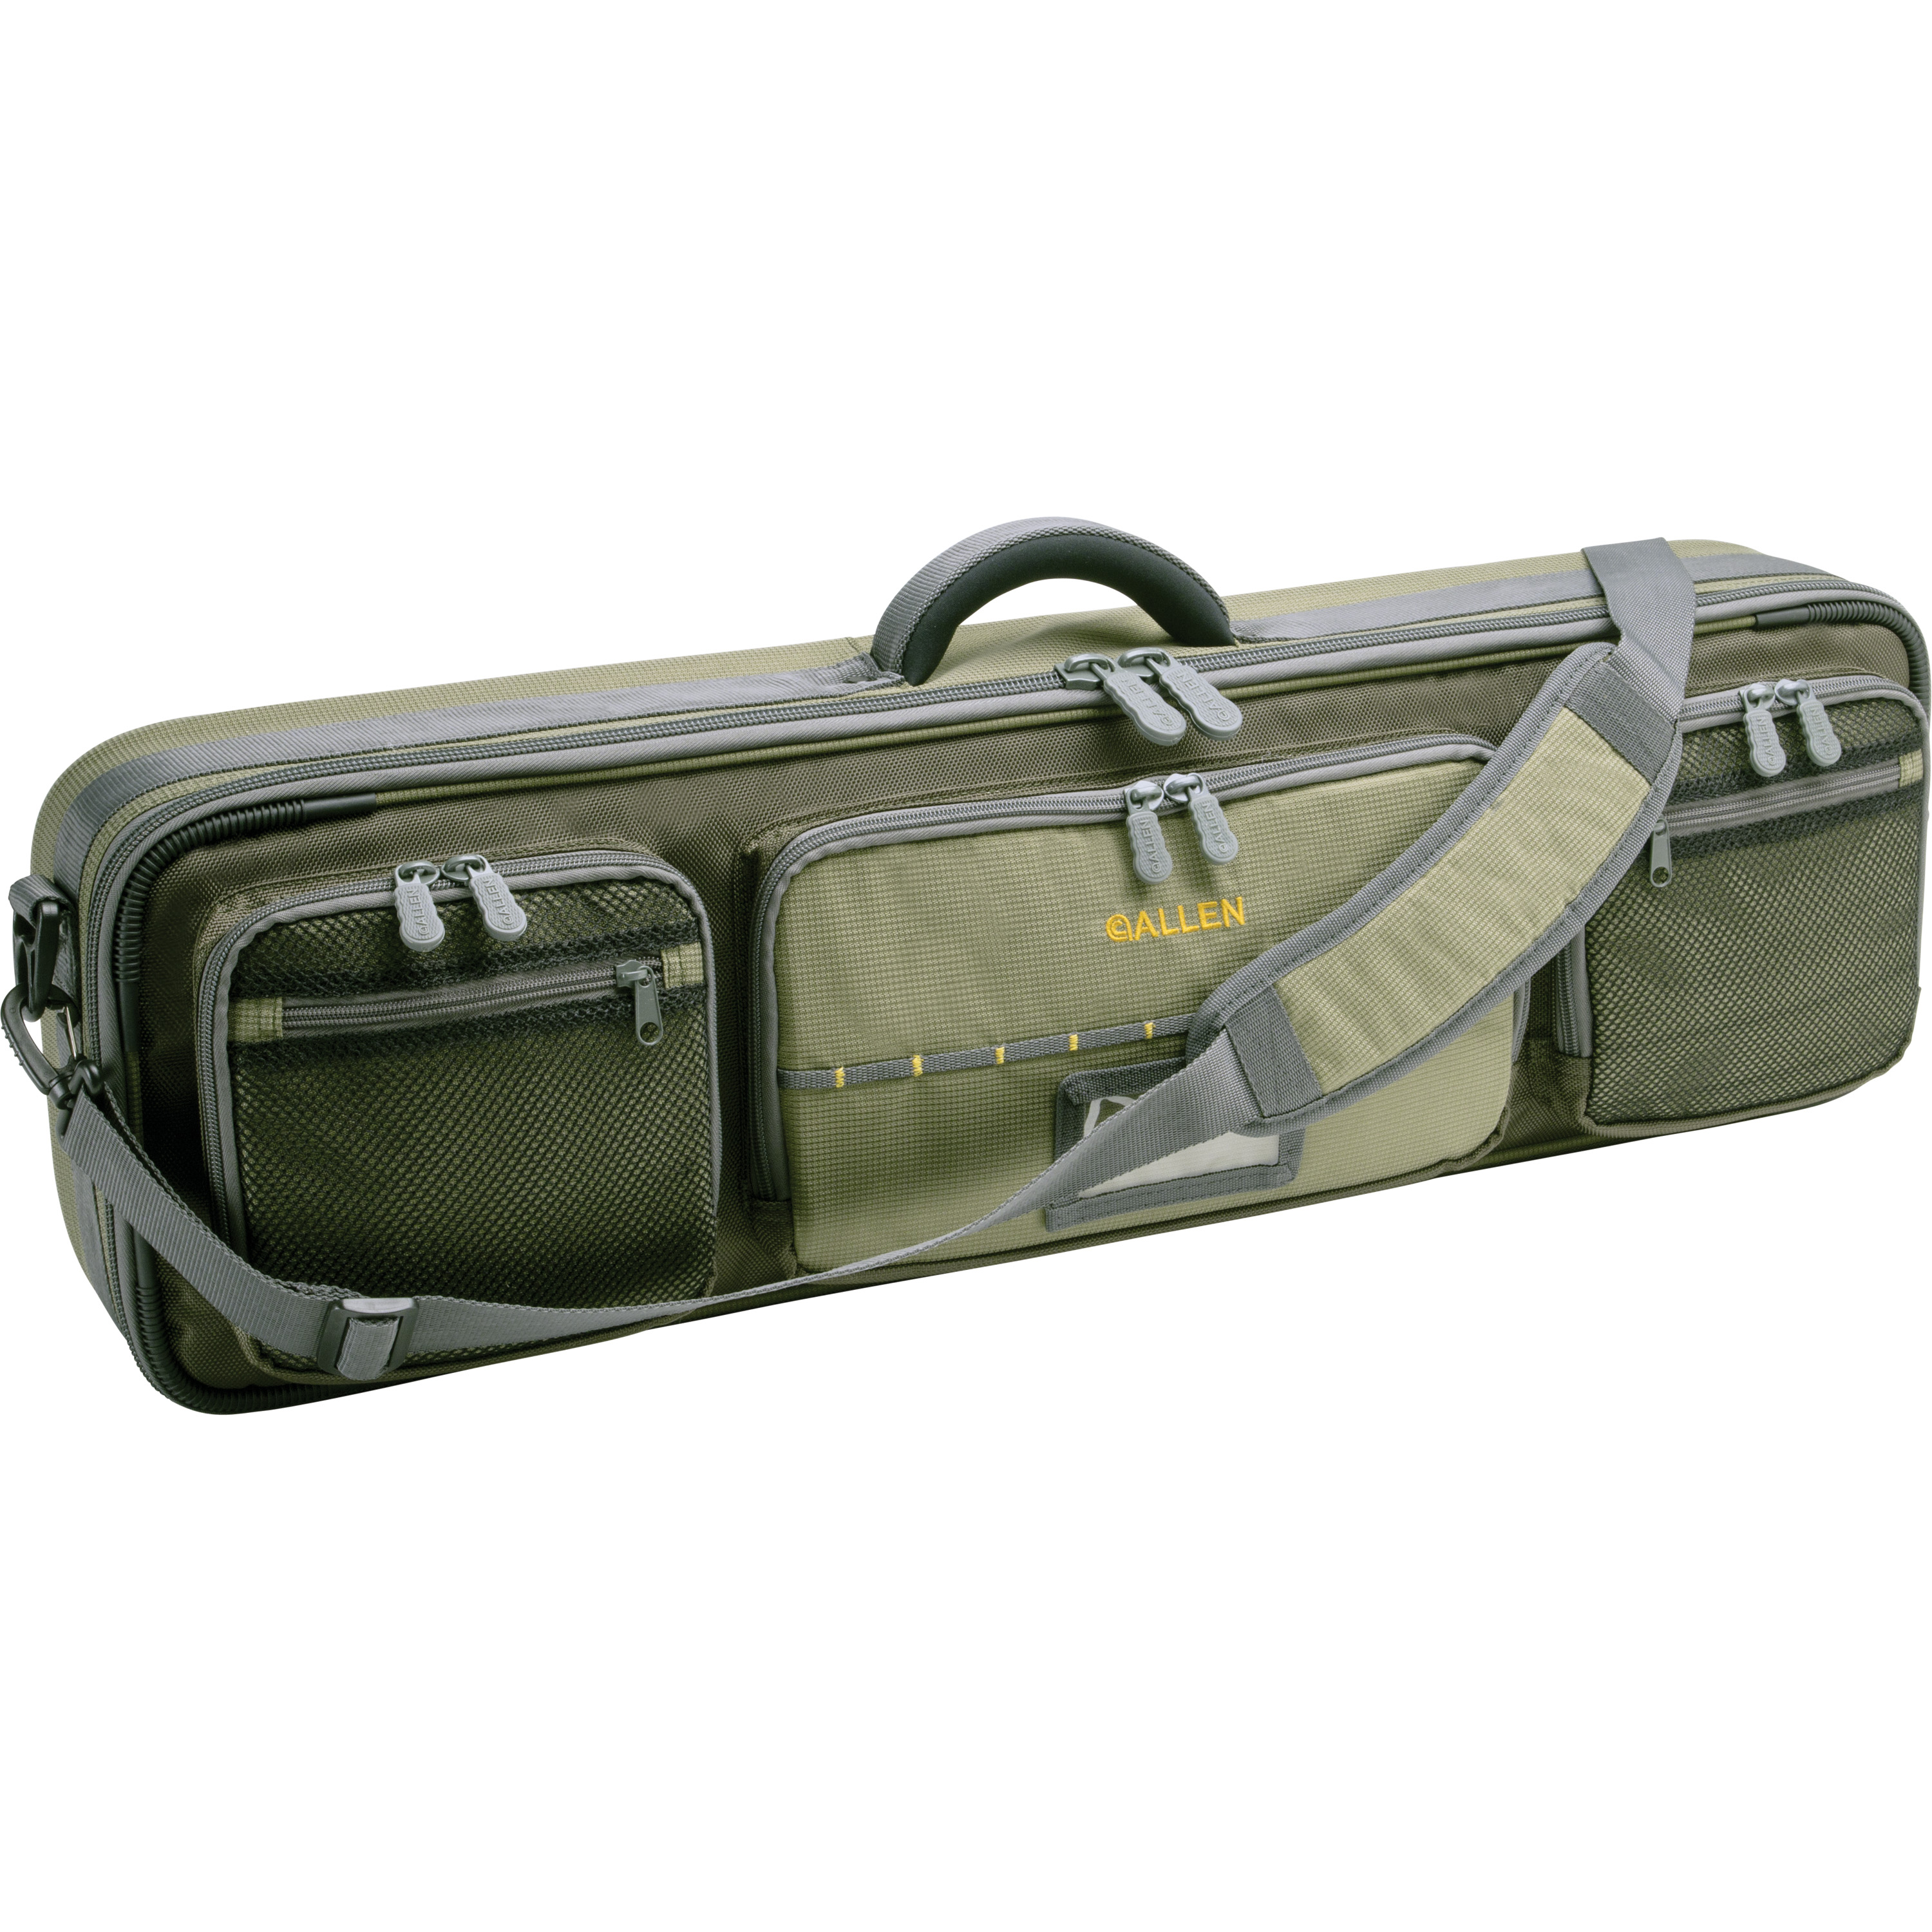 Allen Cottonwood Fishing Rod And Gear Bag